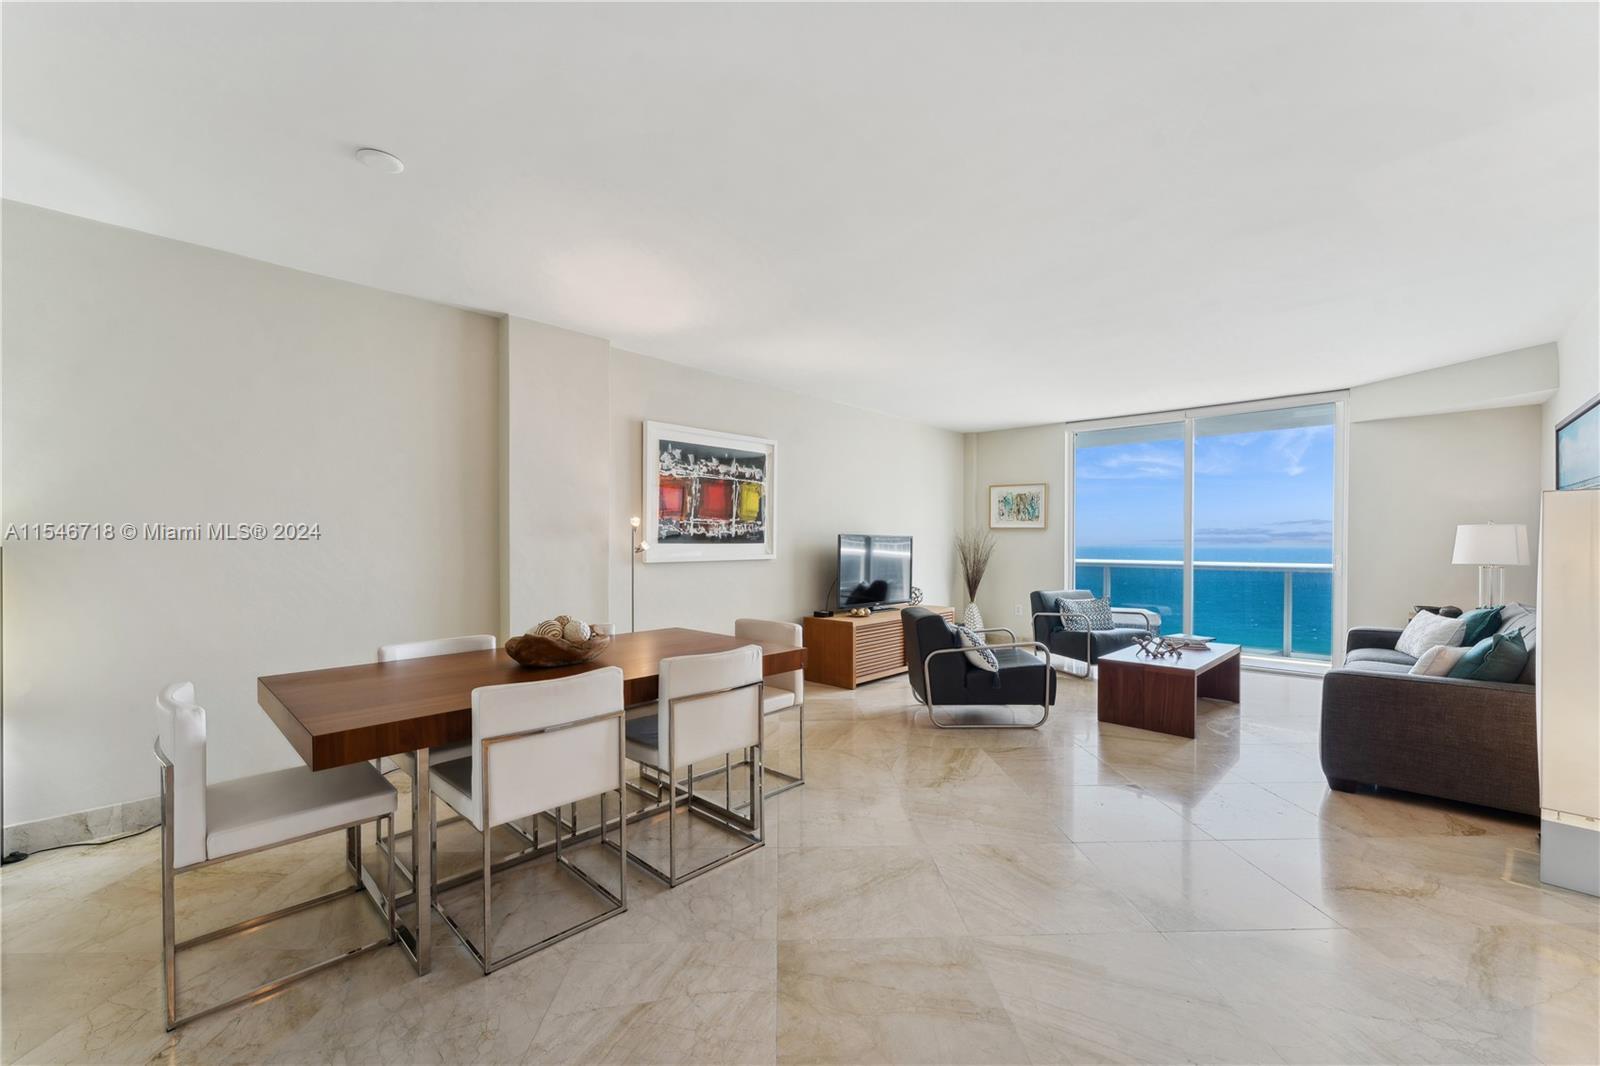 Photo of 10275 Collins Ave #1221 in Bal Harbour, FL